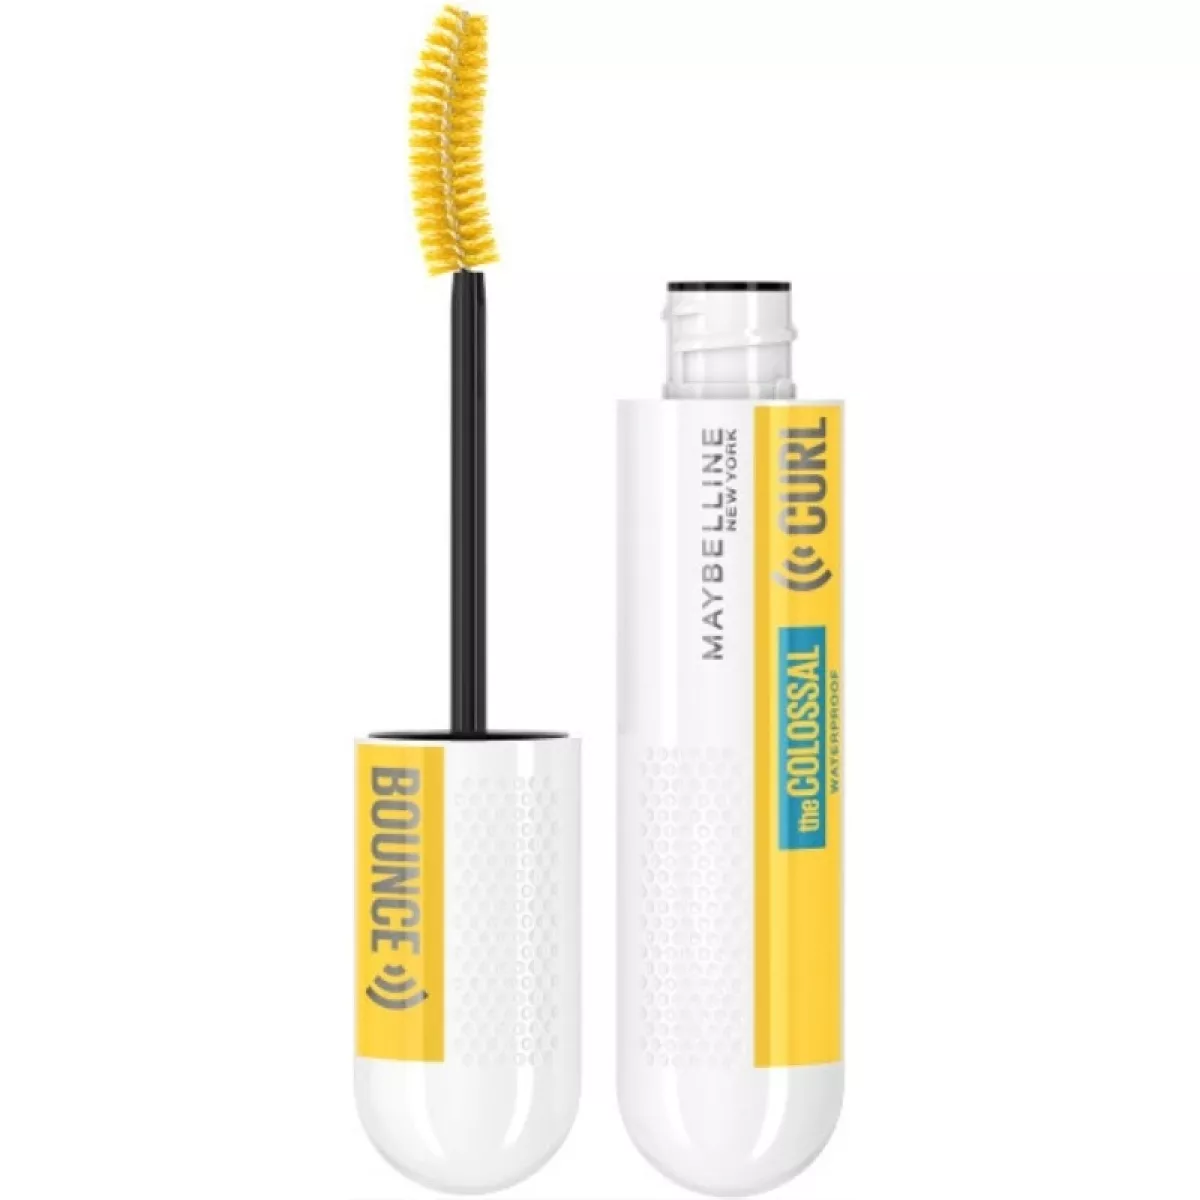 #2 - Maybelline The Colossal Mascara Curl Bounce Waterproof 10 ml - Black